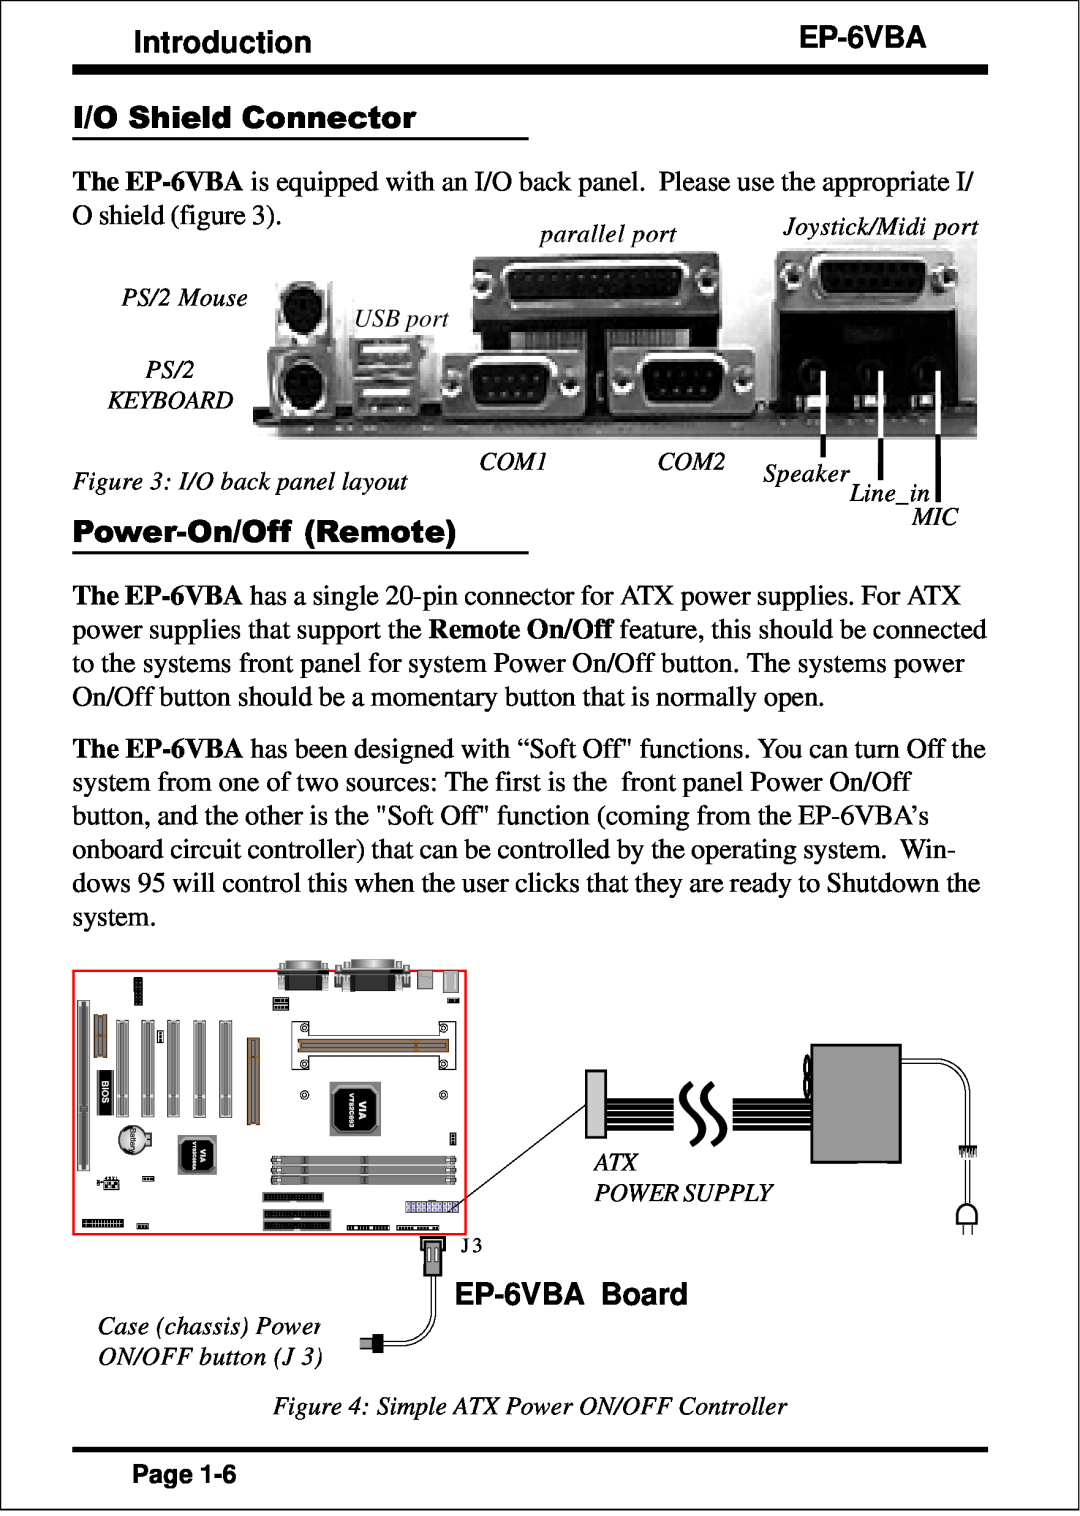 EPoX Computer specifications IntroductionEP-6VBA, I/O Shield Connector, Power-On/Off Remote, EP-6VBA Board 